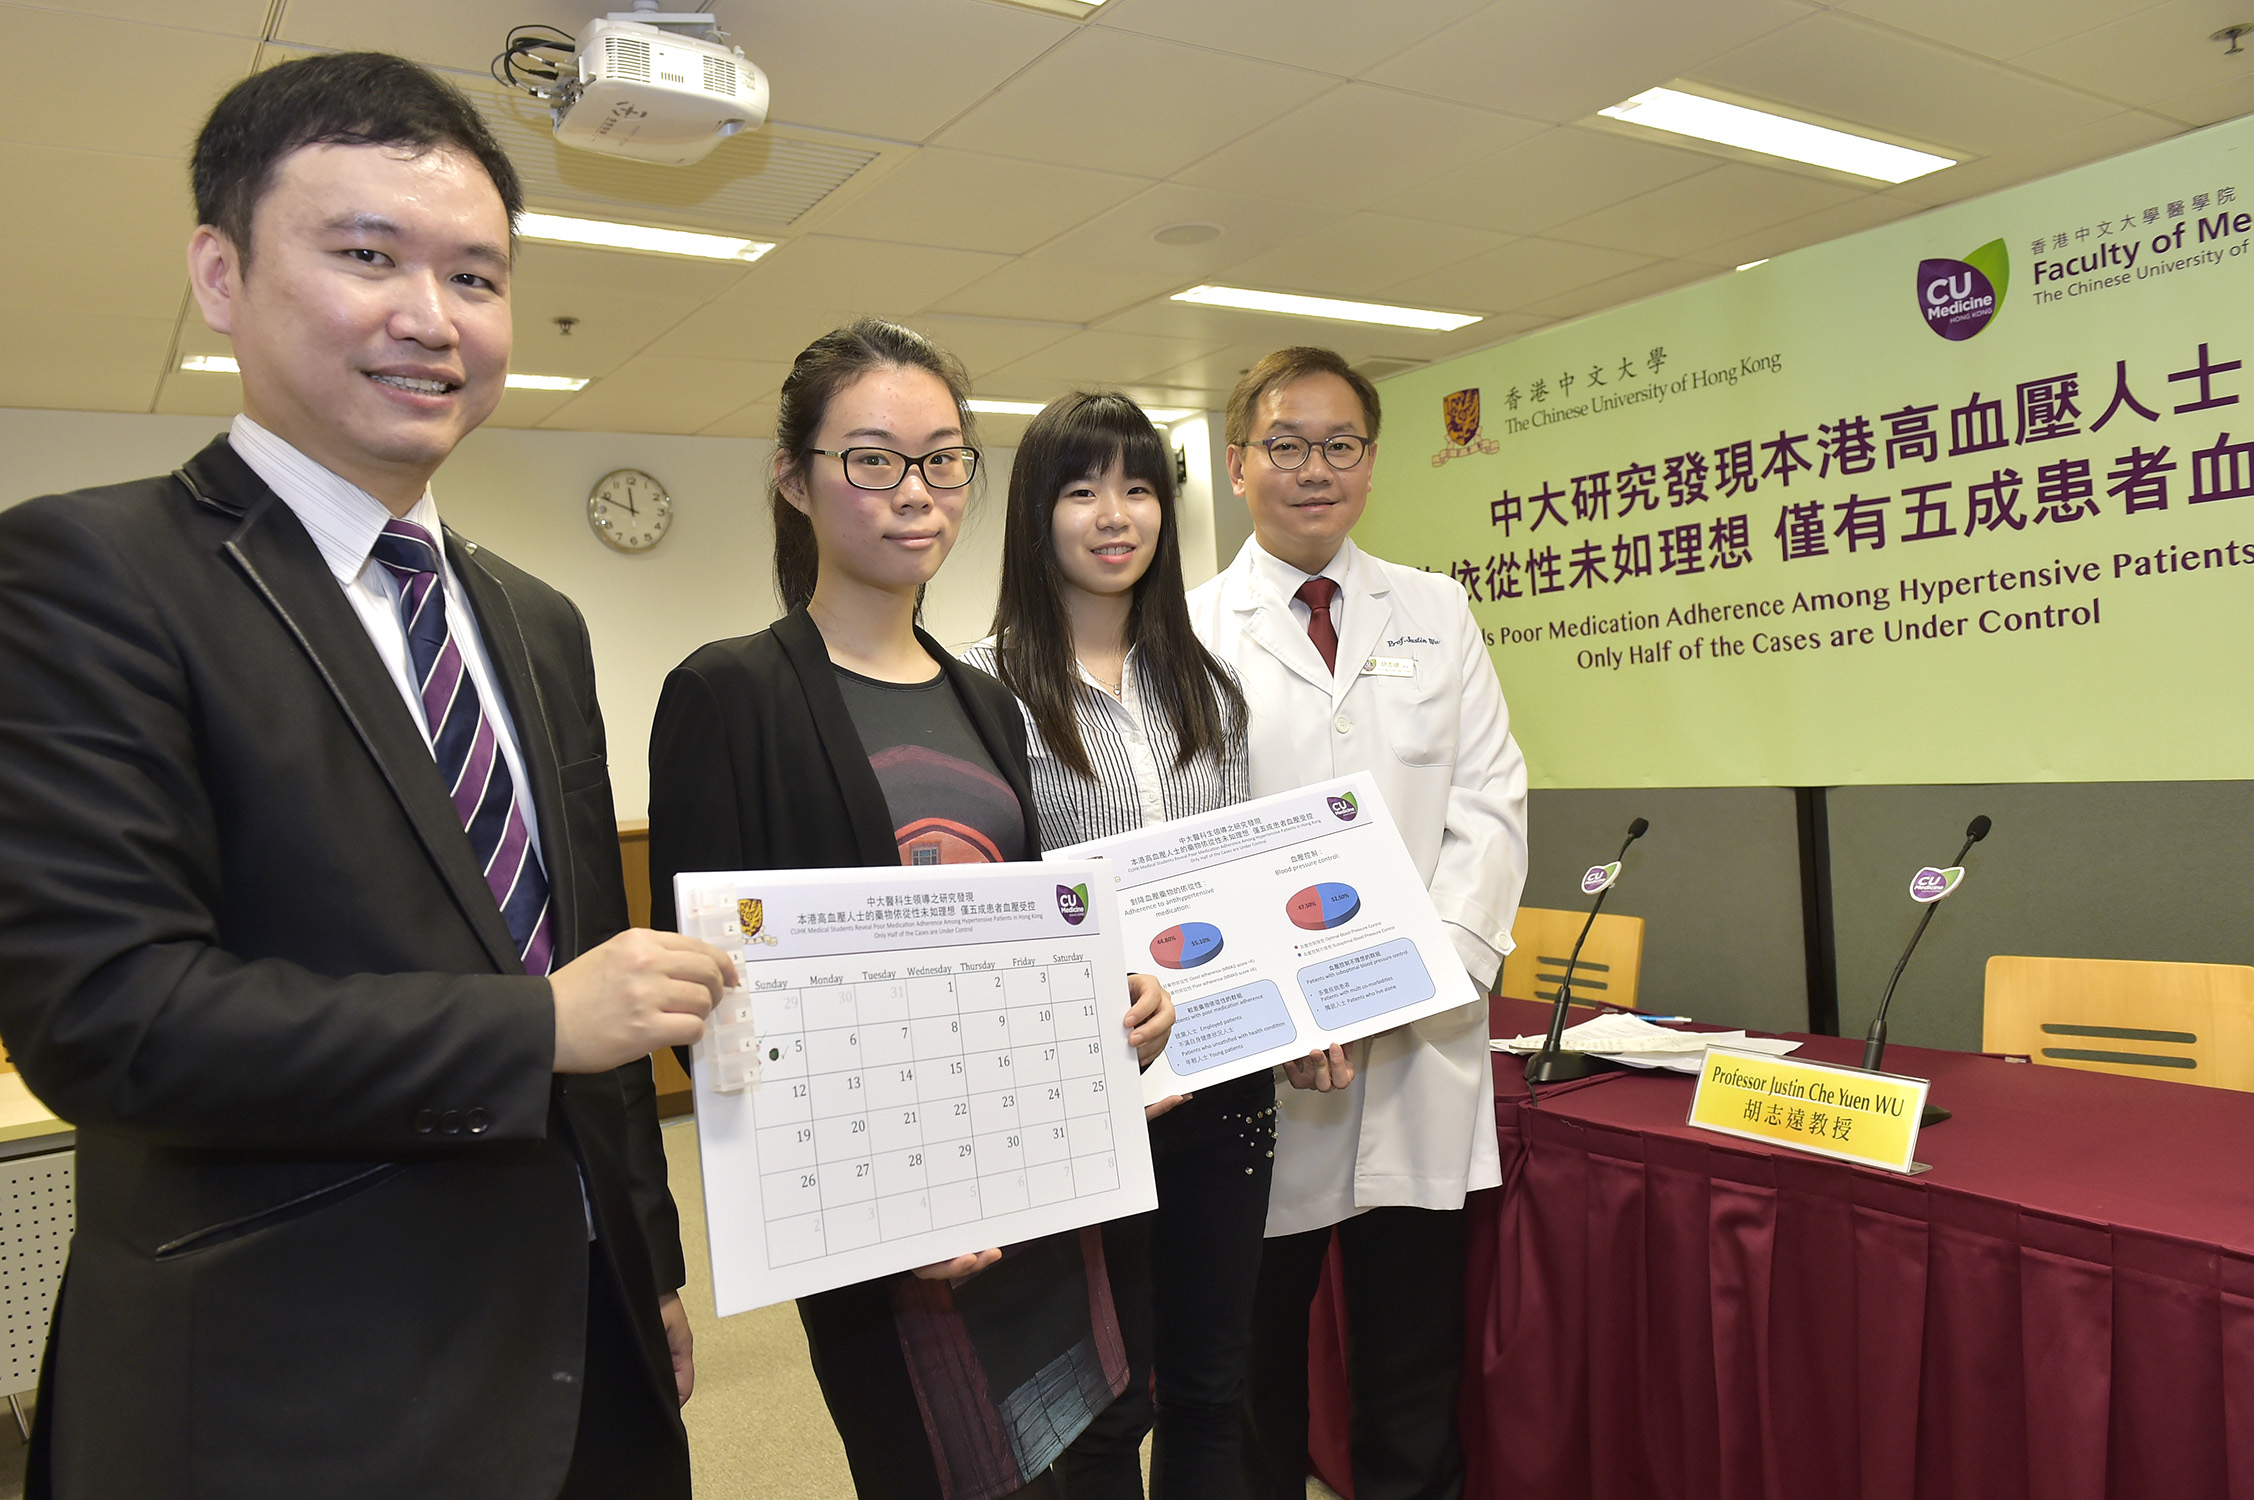 (From left) Dr. Martin Wong, Associate Professor of The Jockey Club School of Public Health and Primary Care; Ms. Candy Kang and Ms. Prilla Tsang, students from GPS; and Prof. Justin Wu, Director of GPS, share research findings on poor medication adherence and blood pressure control among hypertensive patients in Hong Kong.